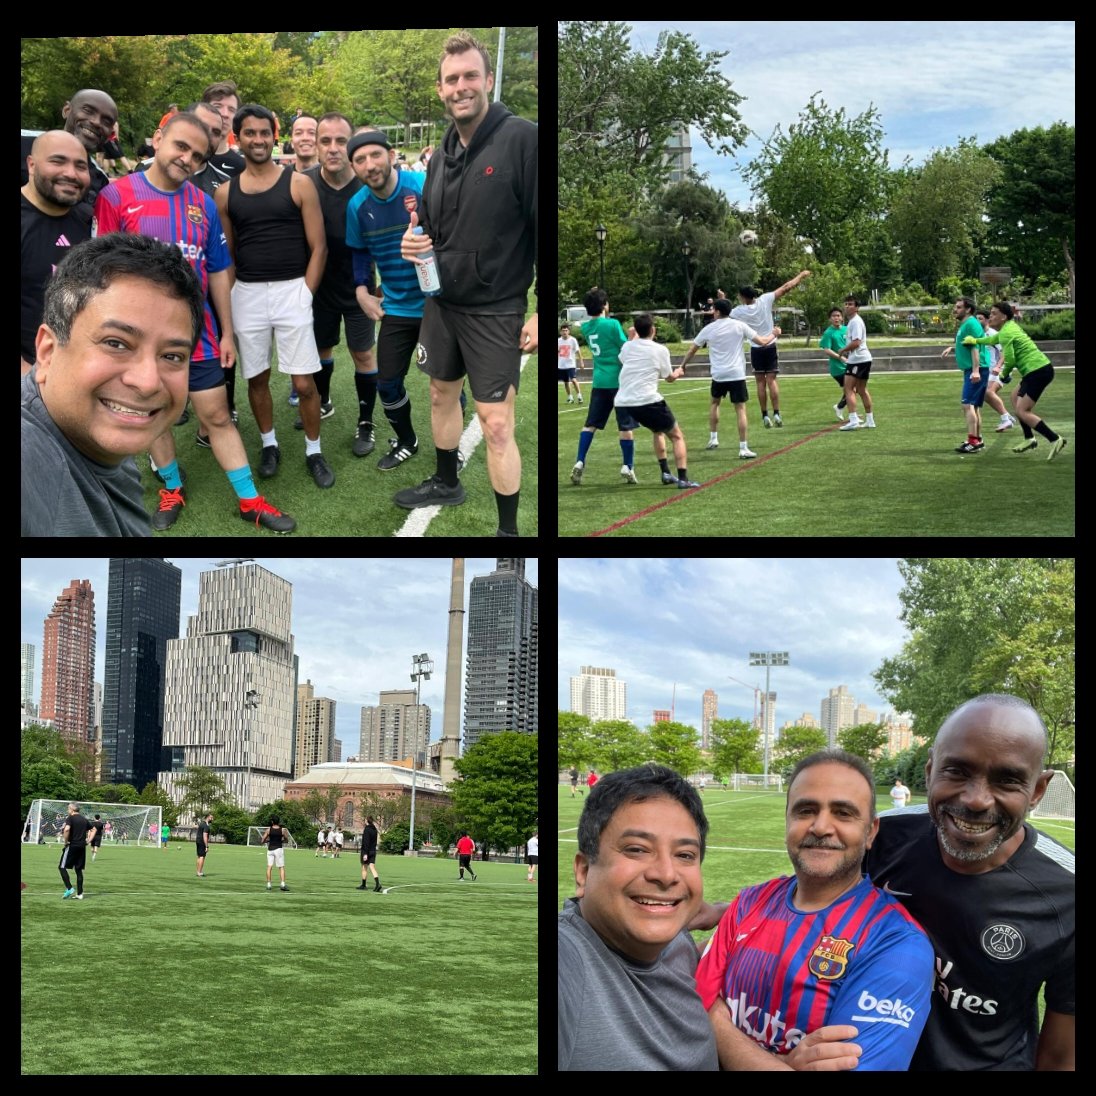 Excited to play the 5th  Roosevelt Island Football Association (RIFA)- Leukemia Lymphoma Society Charity football Tournament at #roosevtisland #newyork . Glad to be a part of this amazing cause #curecancer @MountsinaiUro @IcahnMountSinai @PCF_Science